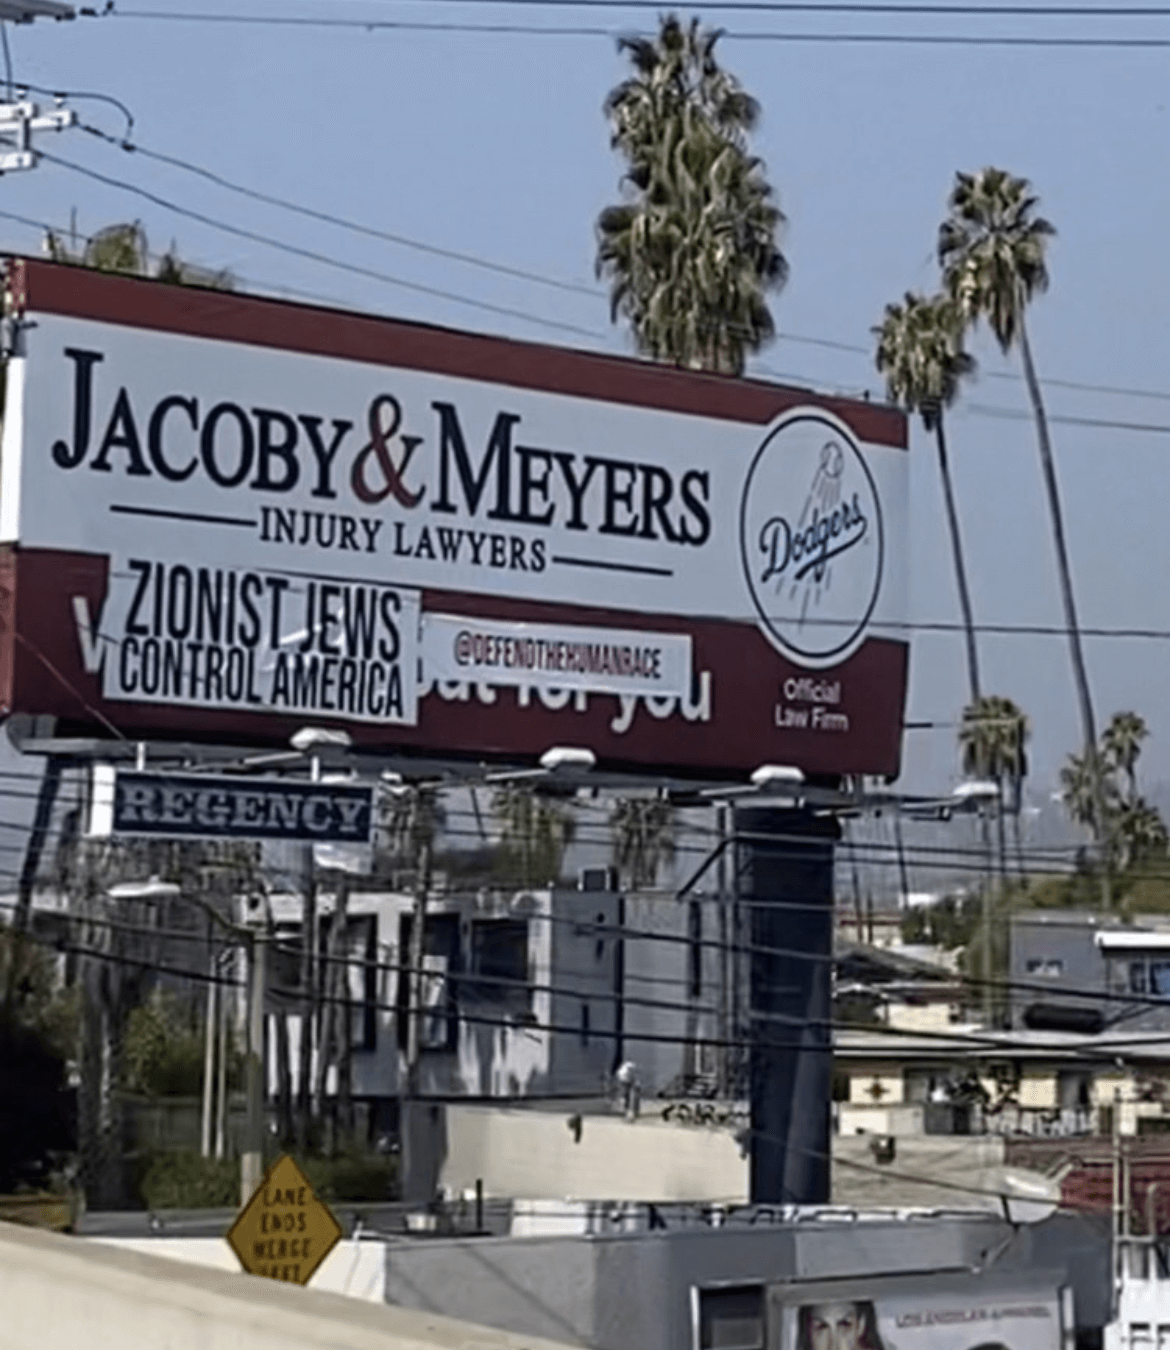 Vandals hit several Los Angeles billboards, defacing at least one with antisemitic propaganda.